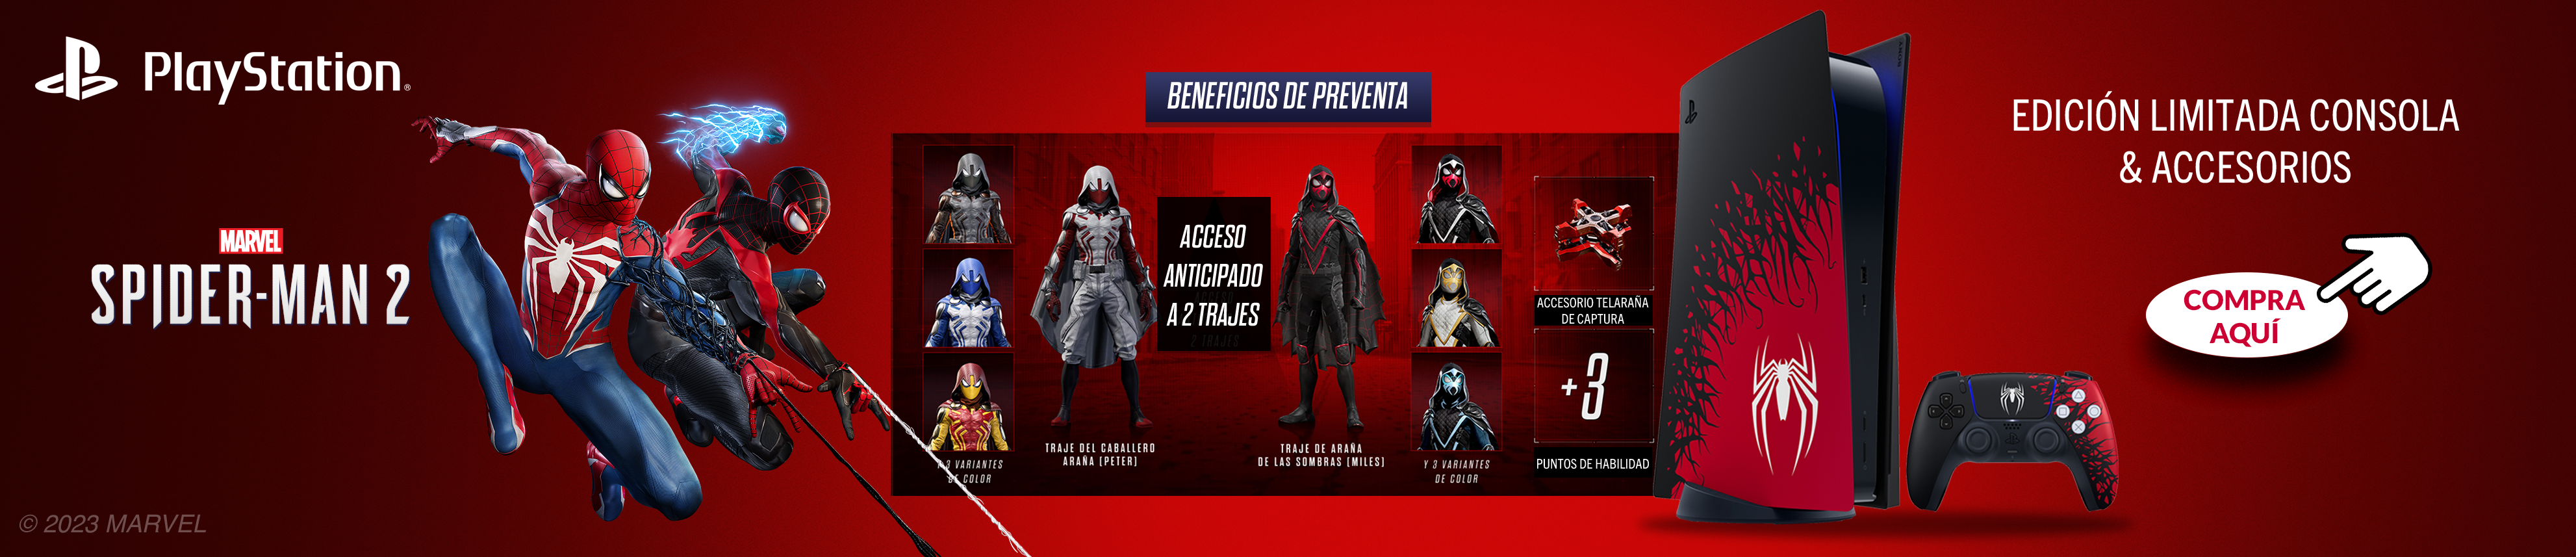 Marvel's Spider-Man Limited Edition Products-Preventa